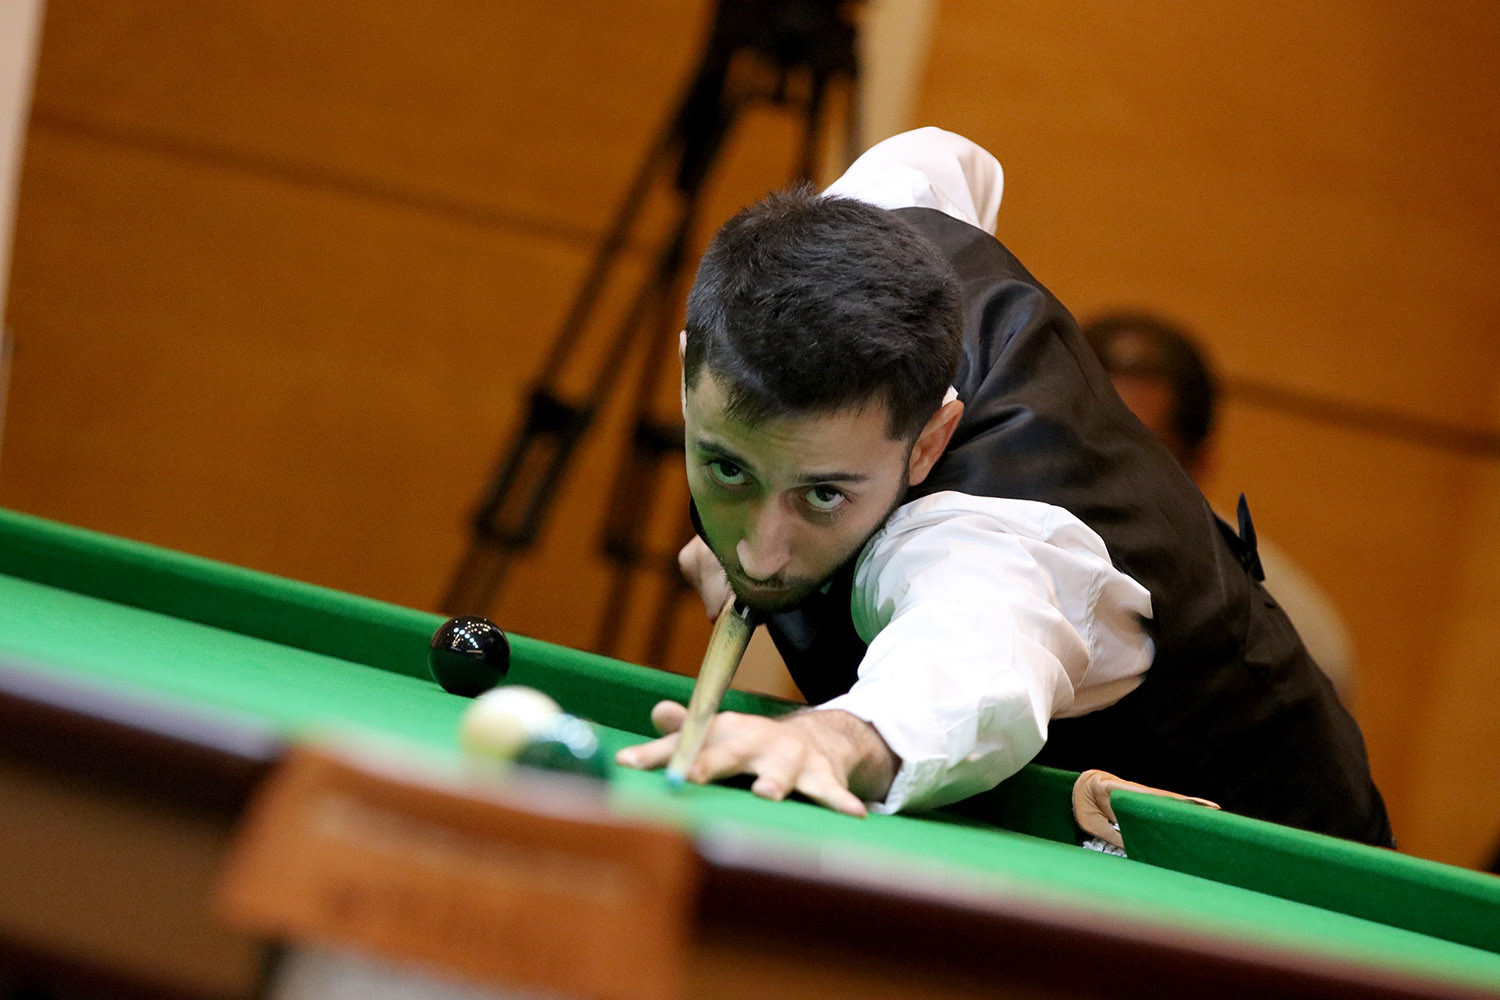 Snooker made its debut as a medal event at the African Games ©WPBSA